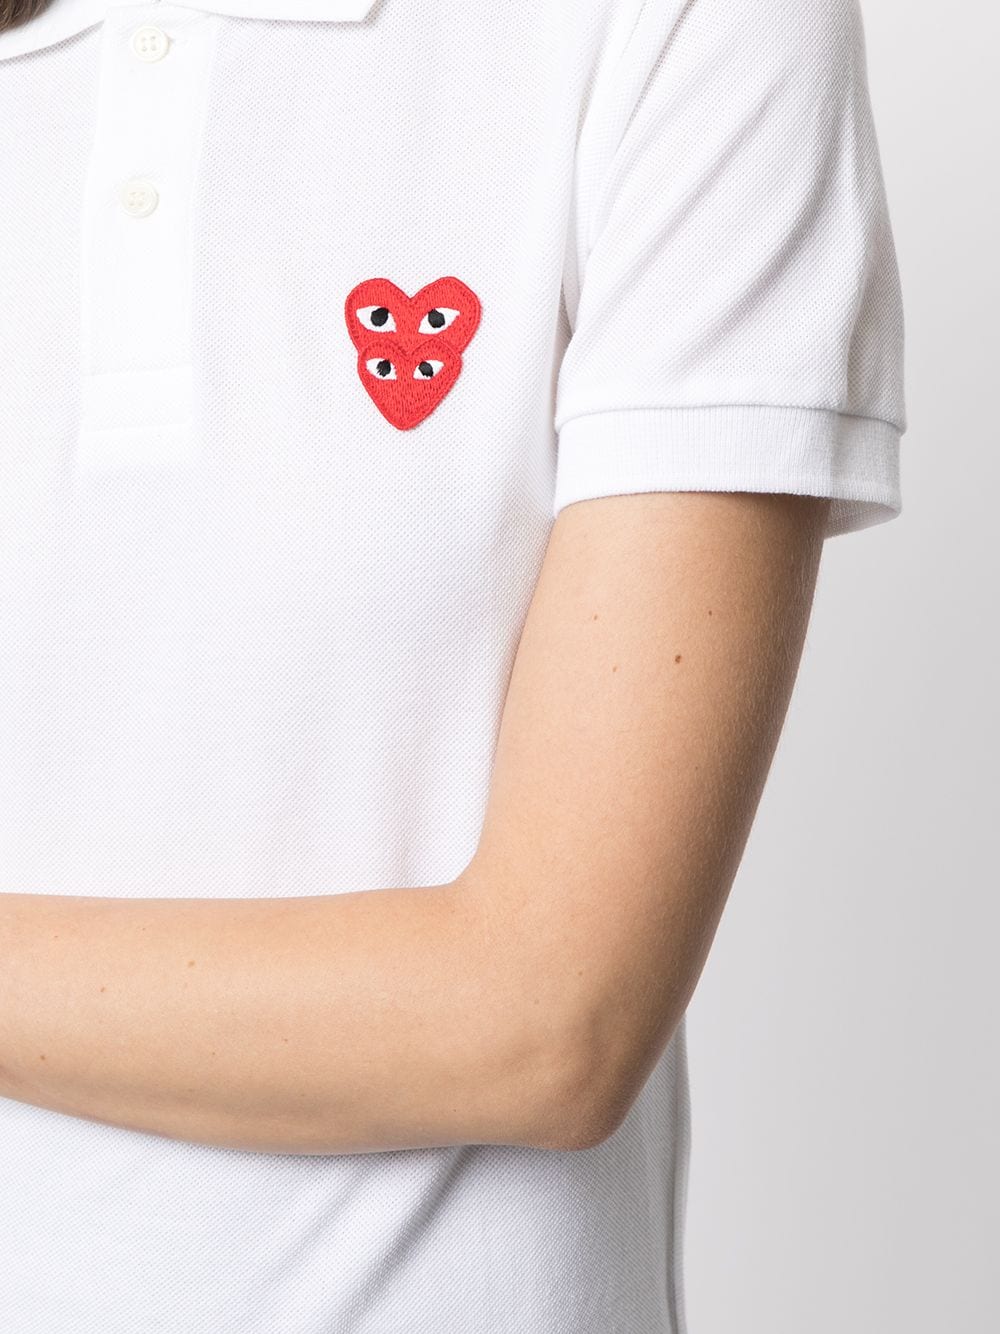 CHEST LOGO-PATCH POLO SHIRT